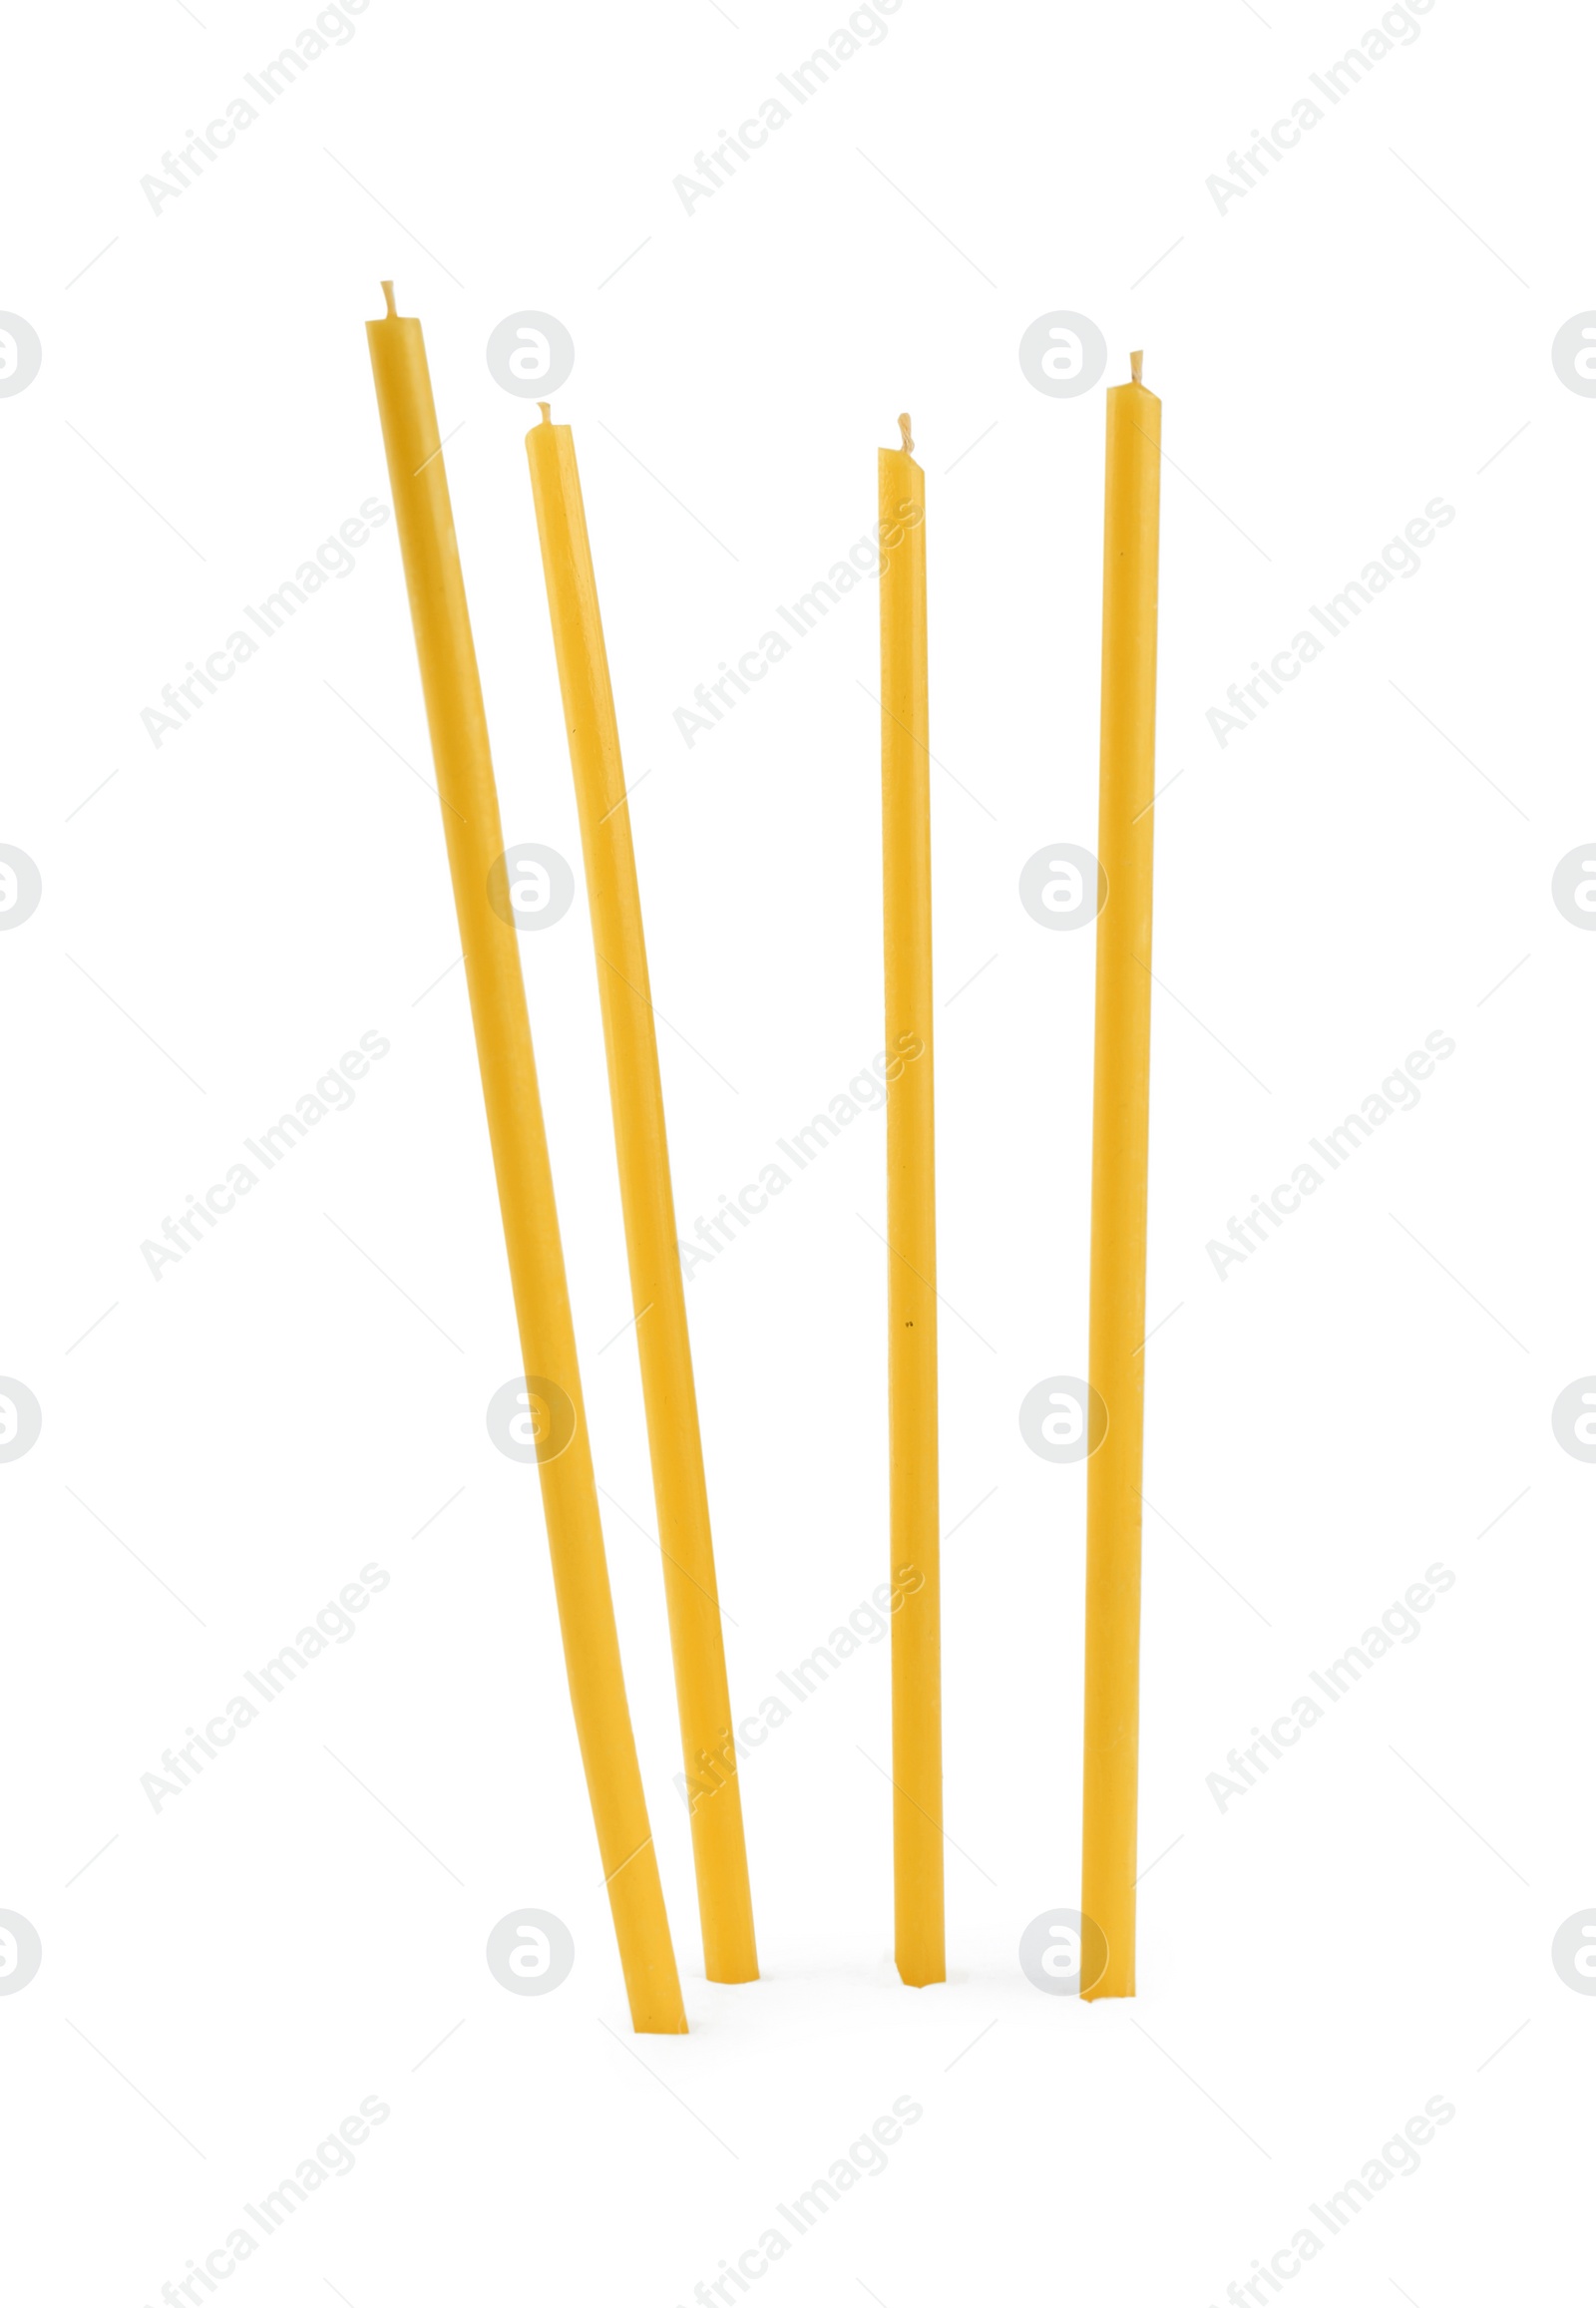 Photo of Many new church candles on white background